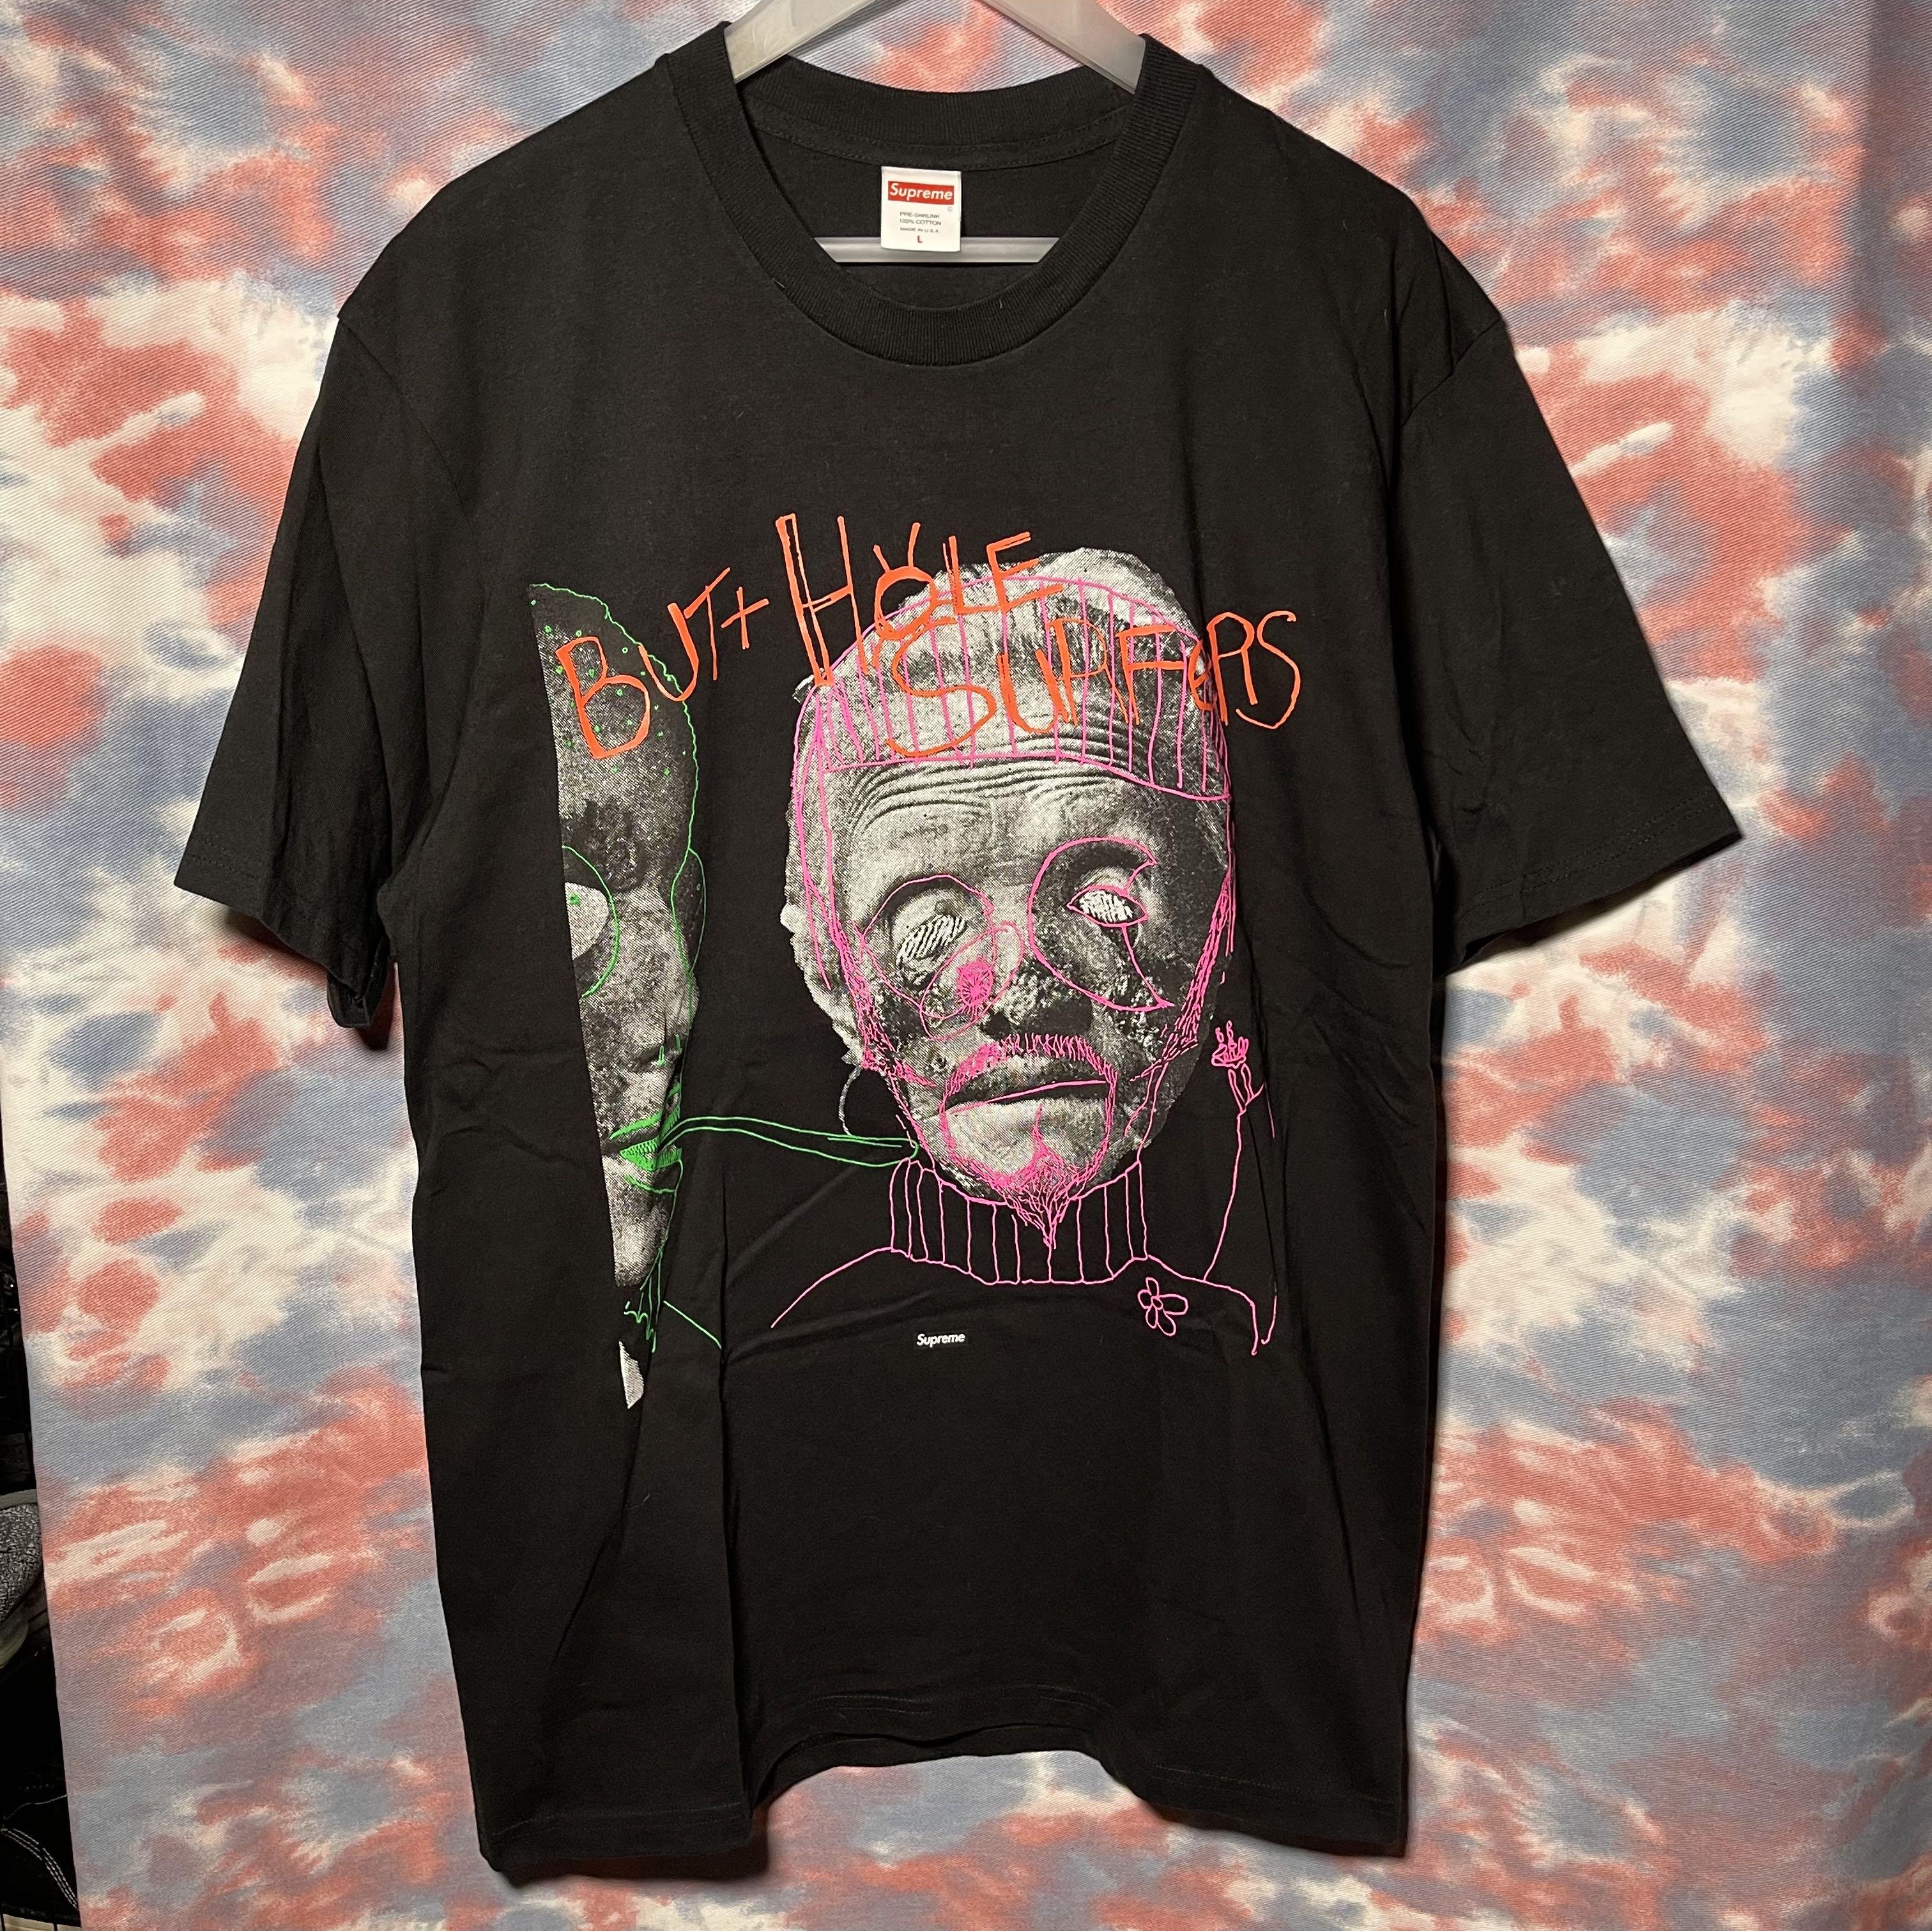 95% new Supreme Butthole Surfers Psychic Tee size L black 21SS, 男